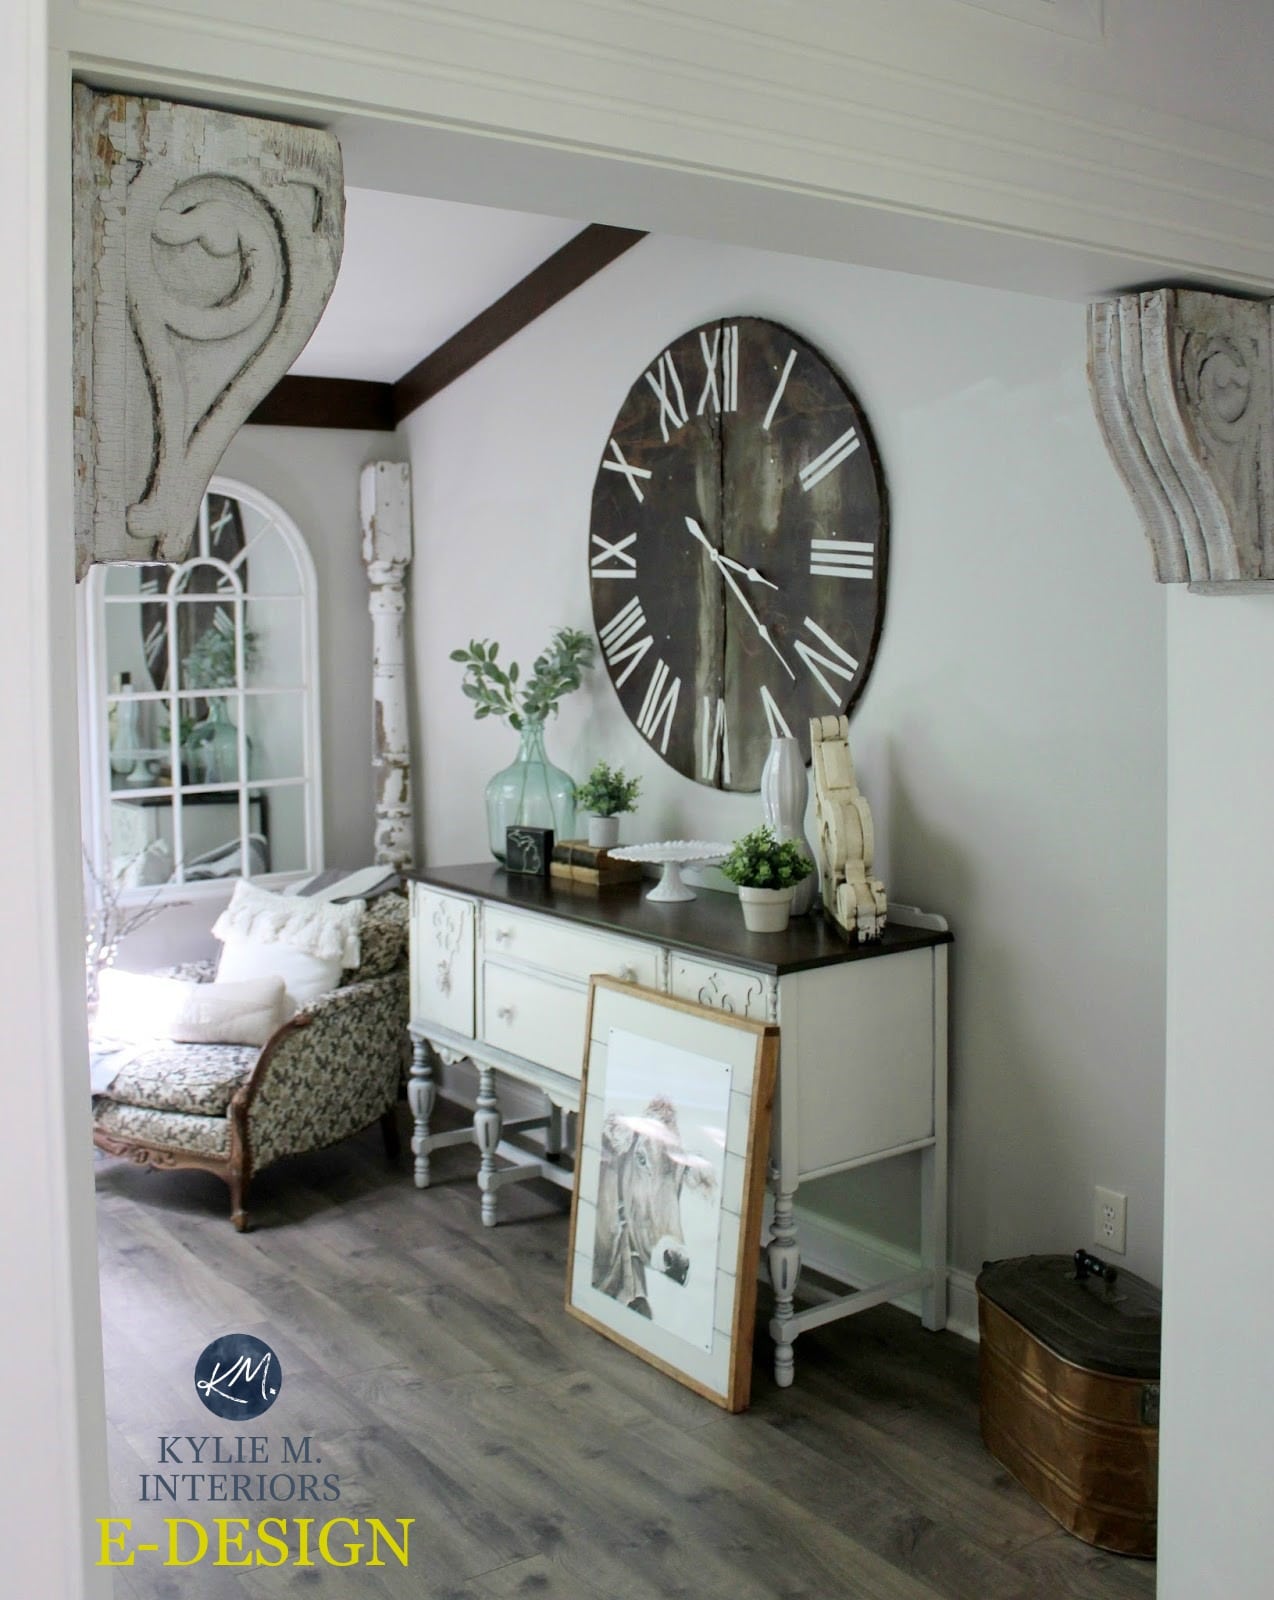 Sherwin Williams Agreeable Gray farmhouse style dining room with decor Kylie M E-design